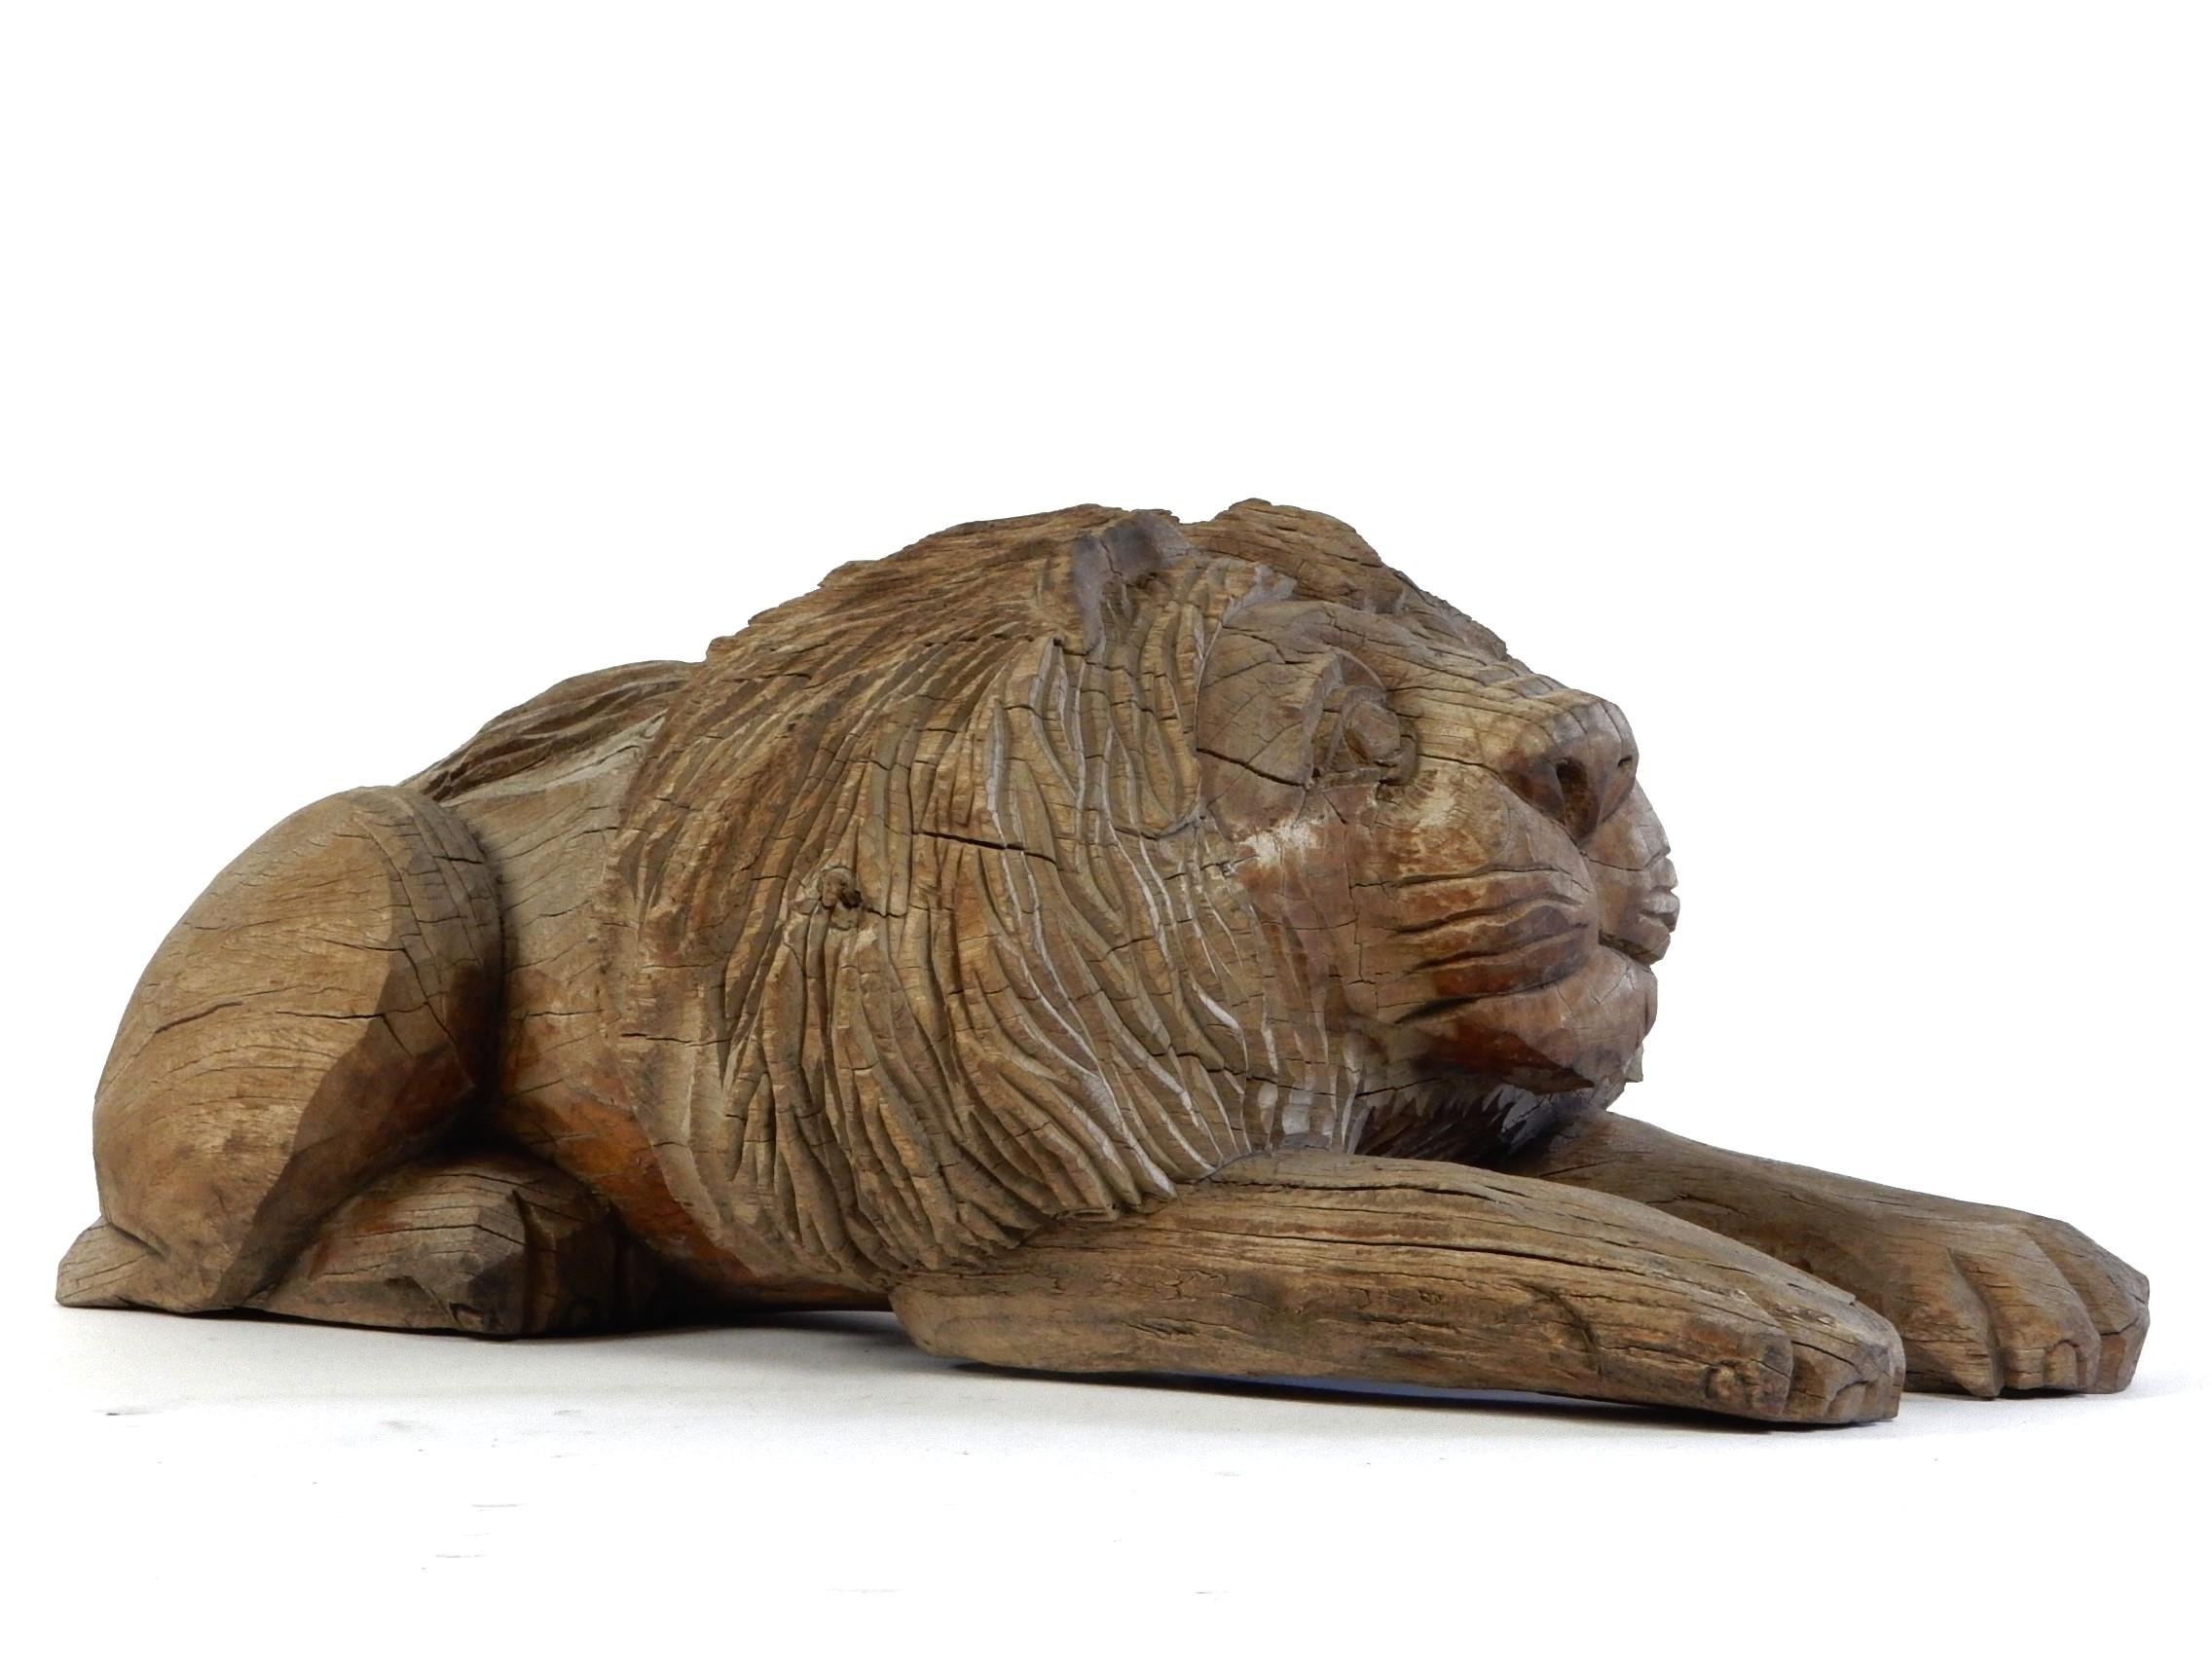 Charming early 20th century hand carved laying lion sculpture.
Formed out a single block of wood.
Fabulous piece of folk art with nice aged patina. 